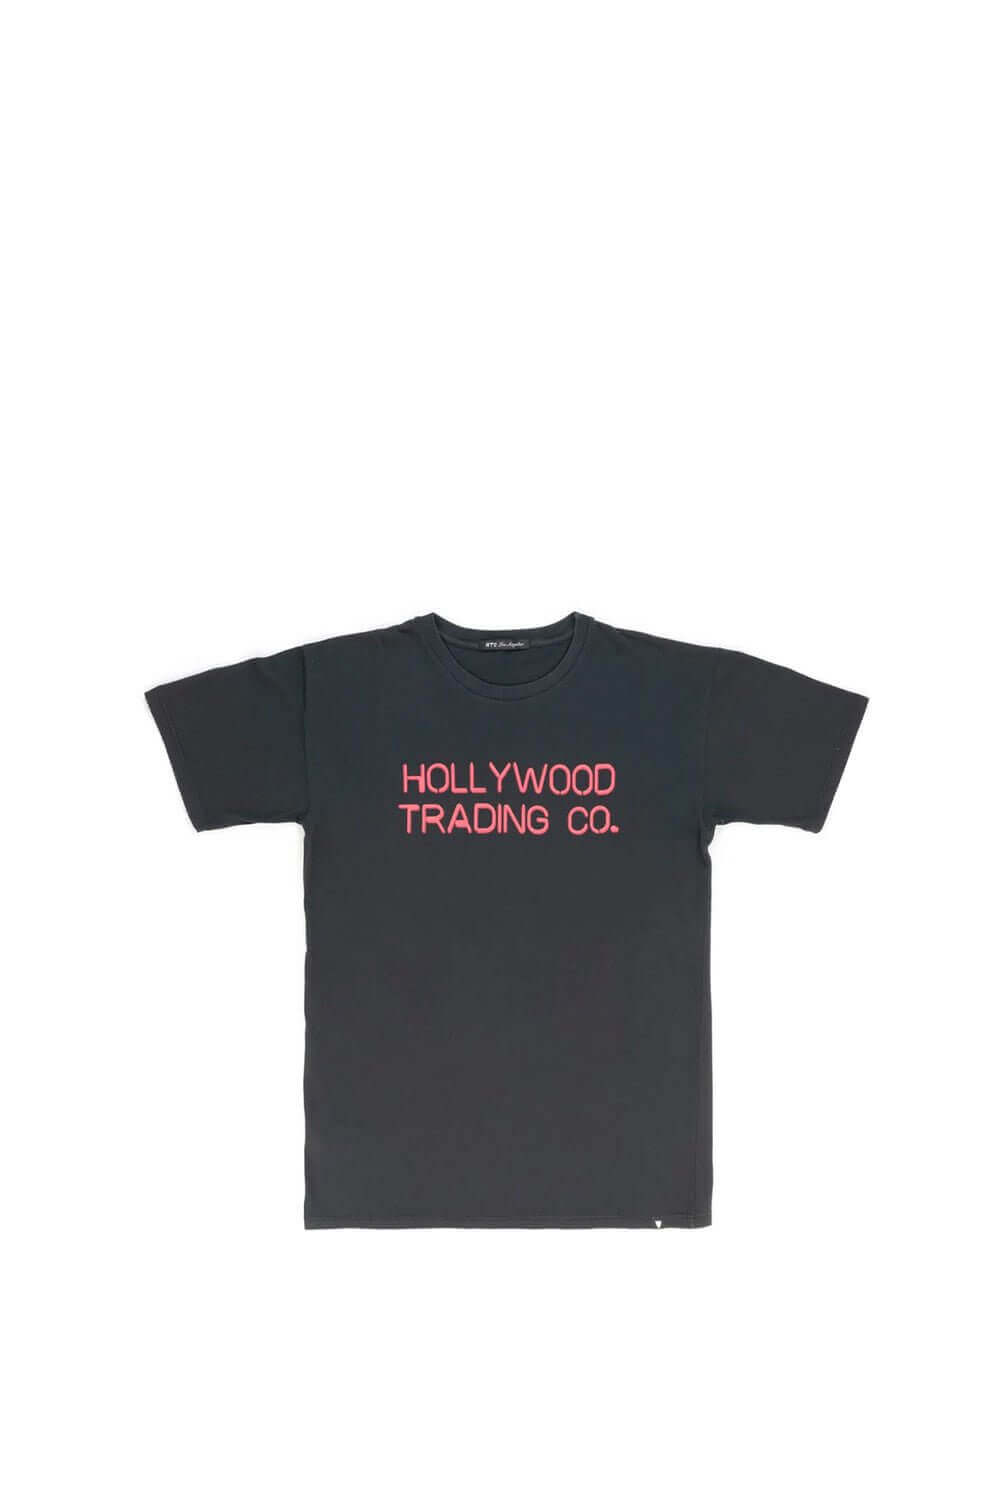 HOLLYWOOD TRADING CO. T-SHIRT Regular fit t-shirt with 'Hollywood Trading Co.' printed on the front. 100% cotton. Made in Italy. HTC LOS ANGELES